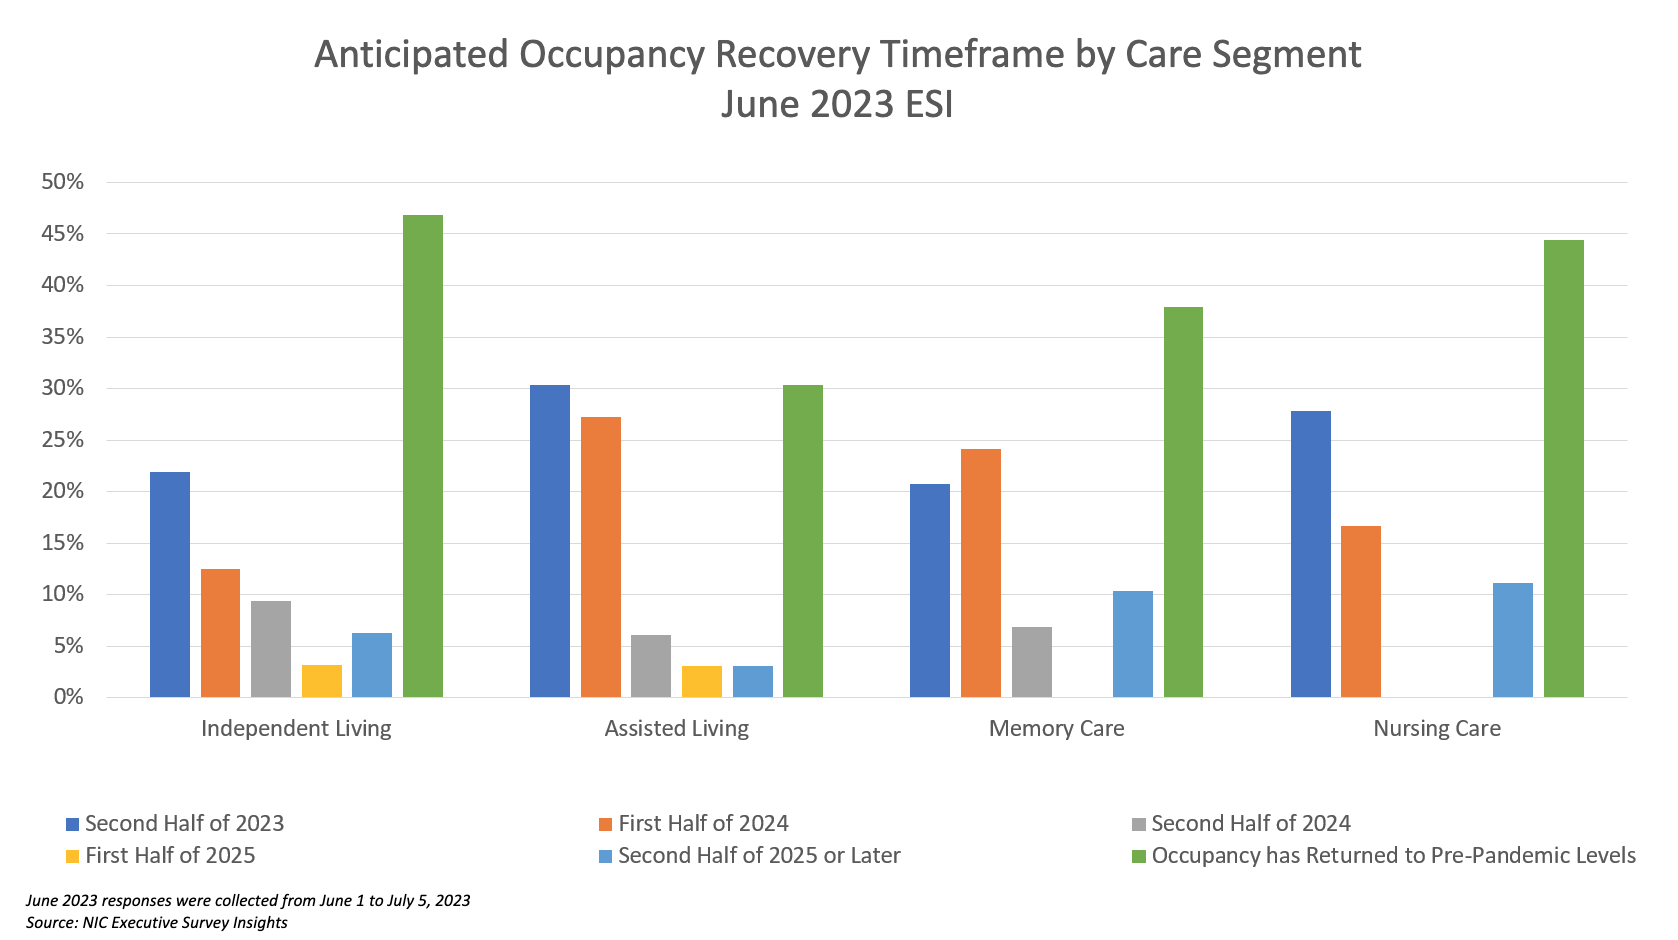 Anticipated Occupancy Recovery bar graph by care segment broken down by care segment, conveying that sizable shares of communities have already seen occupancies recover to pre-pandemic levels